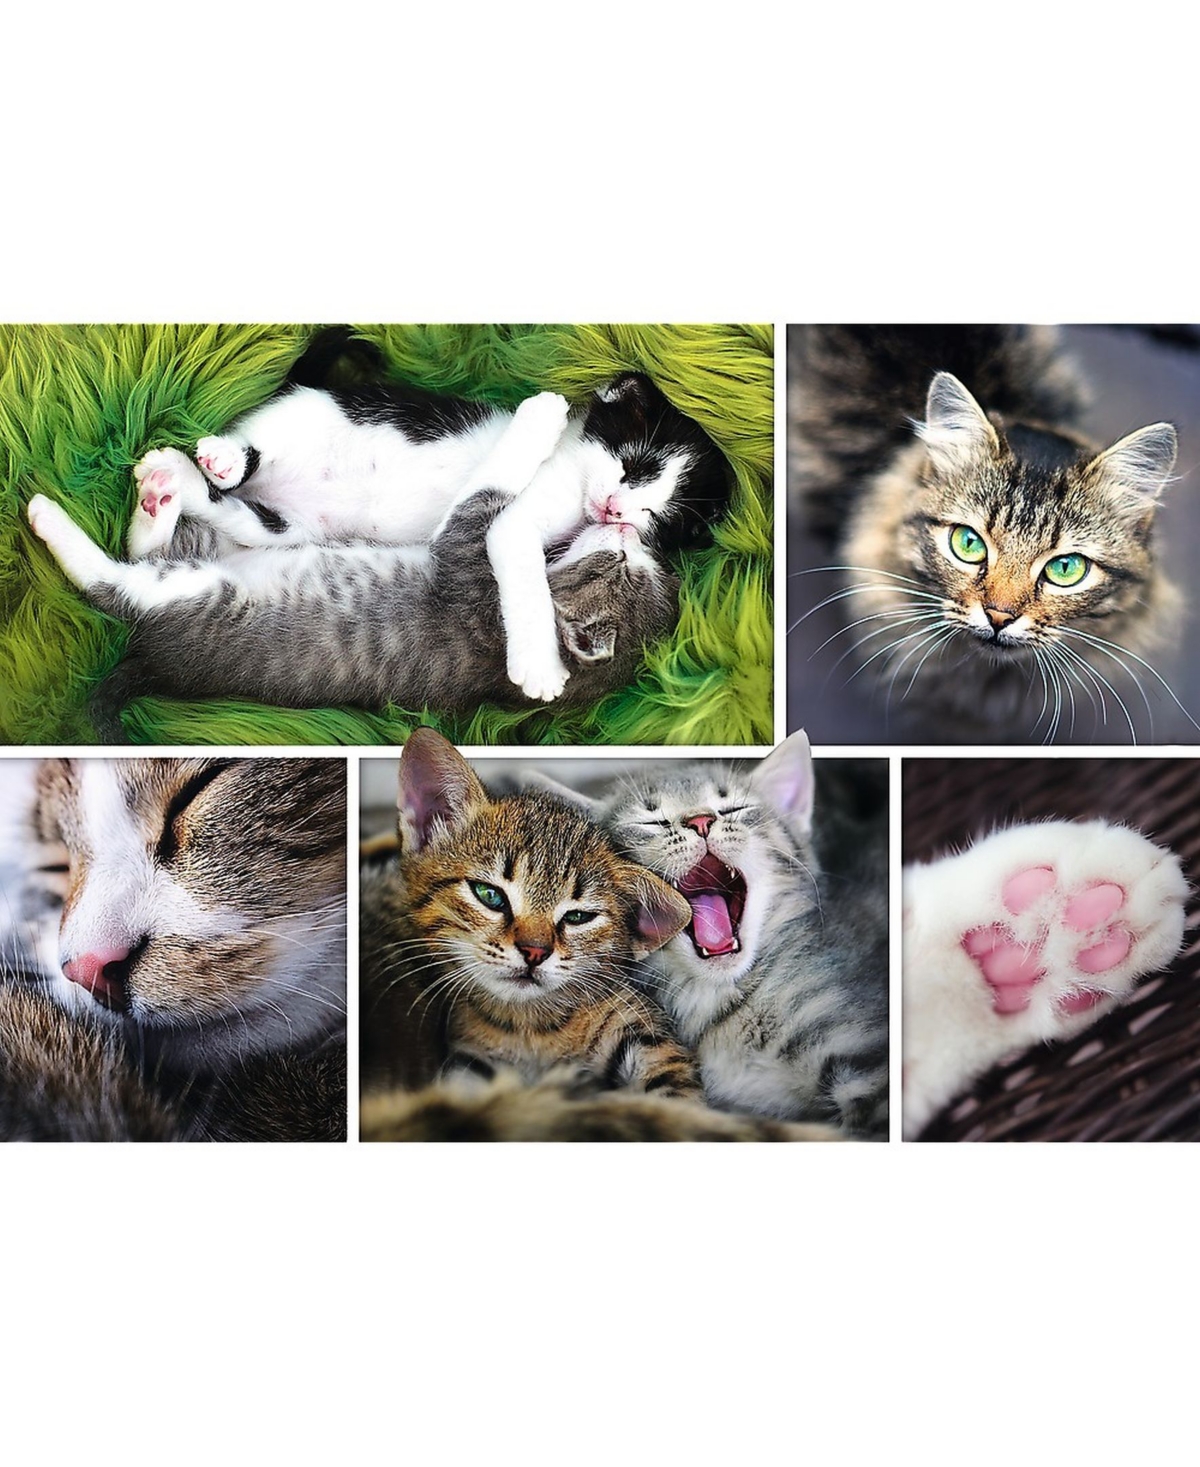 Shop Trefl Jigsaw Puzzle Just Cat Things Collage, 1500 Piece In Multi